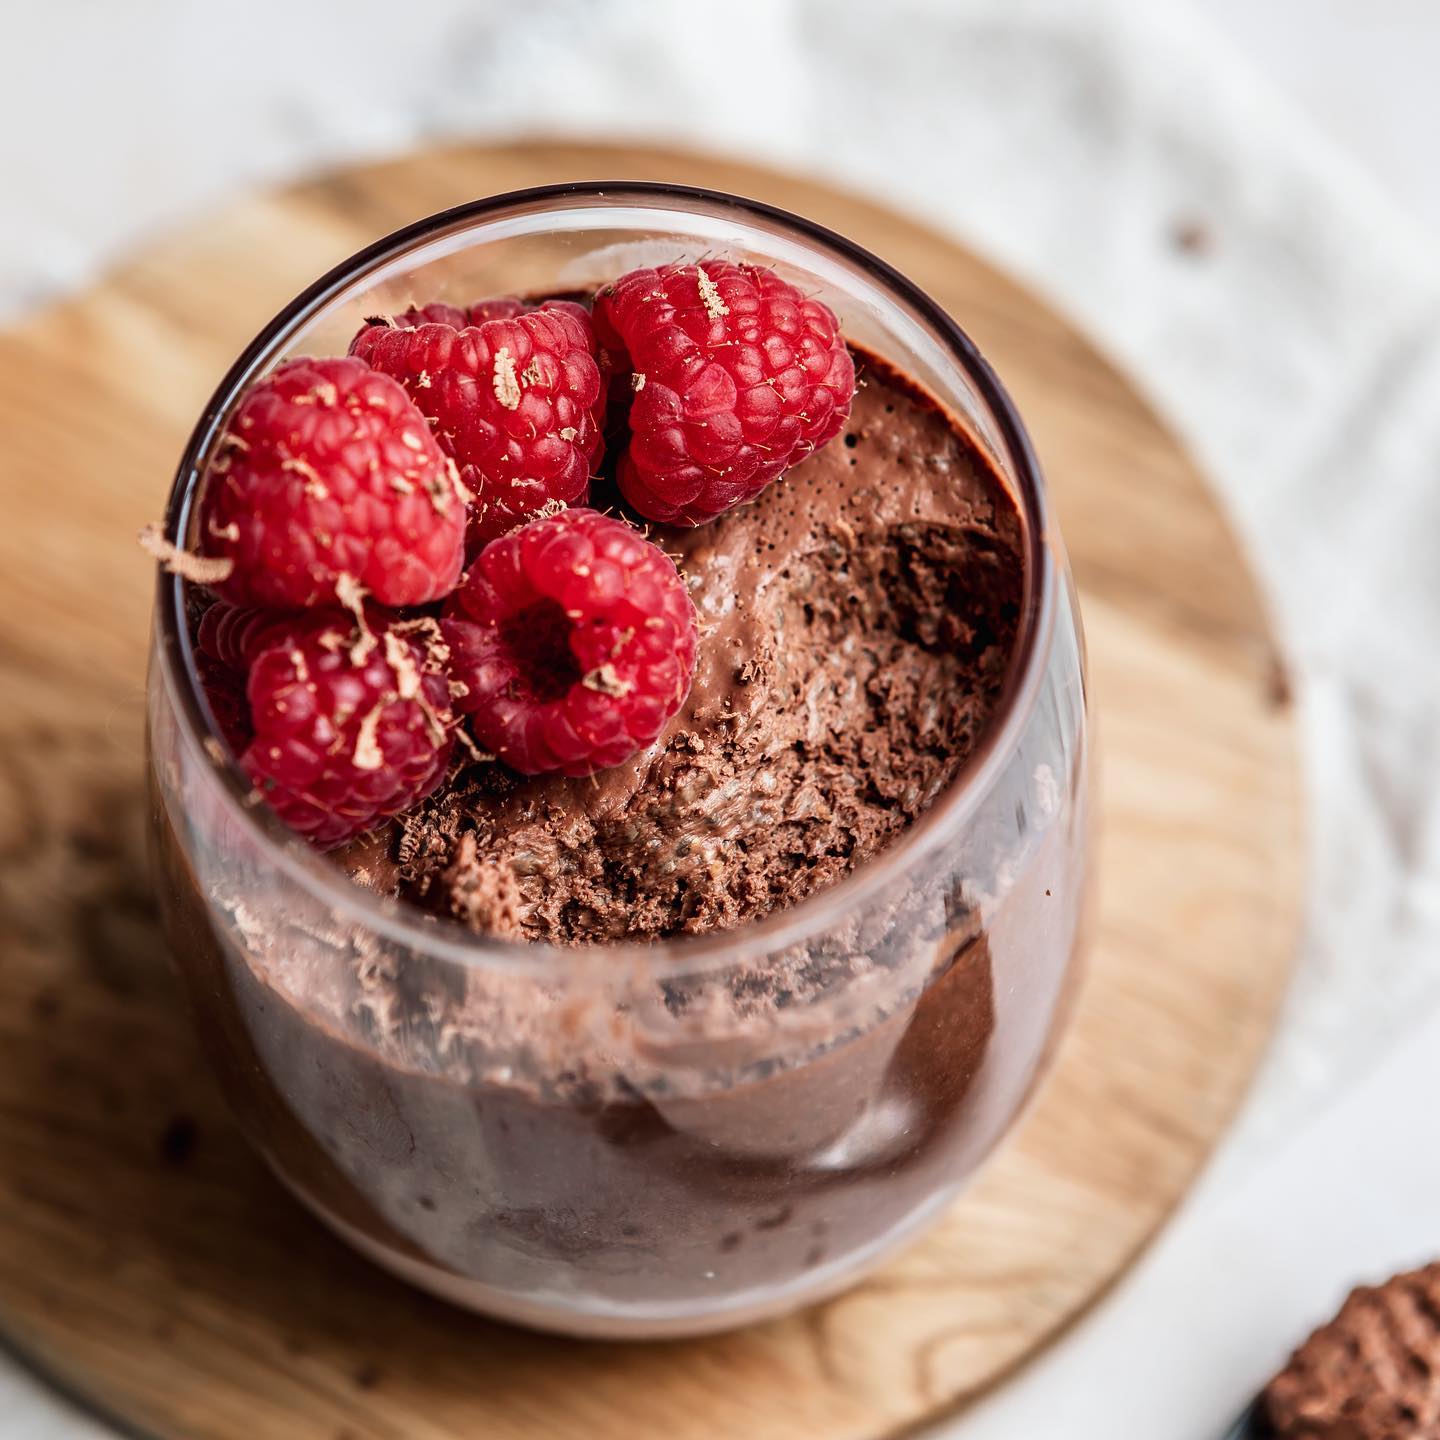 CHOCOLATE CHIA PUDDING
You may have seen this in my stories the other day as it’s my new go to for a post dinner chocolate treat! It’s rich, thick and chocolatey and ready in just 15 minutes. It uses all natural ingredients which I’m loving as my stomach is feeling unsettled at the moment. I’ve written this recipe up full on my website with a little intro to chia seeds if you’re not sure what they are, but they are a great addition to your diet providing much needed fibre and omega 3s! 

Hit save to give this a try:

Ready in 15 mins
Serves 1

INGREDIENTS

15g chia seeds
50g Greek yogurt 0%
40ml unsweetened almond milk
8g cacao powder @planetorganic 
1.5 tbsp maple syrup
20g @manilife smooth peanut butter

METHOD

1. Add all the ingredients to a bowl and whisk until smooth and combined.
2. Spoon into a serving glass and refrigerate for at least 10mins.

Kcal 336 Carbs 31 Fat 16 Protein 15

Tag @sarahshealthykitchen if you give this one a try 💛